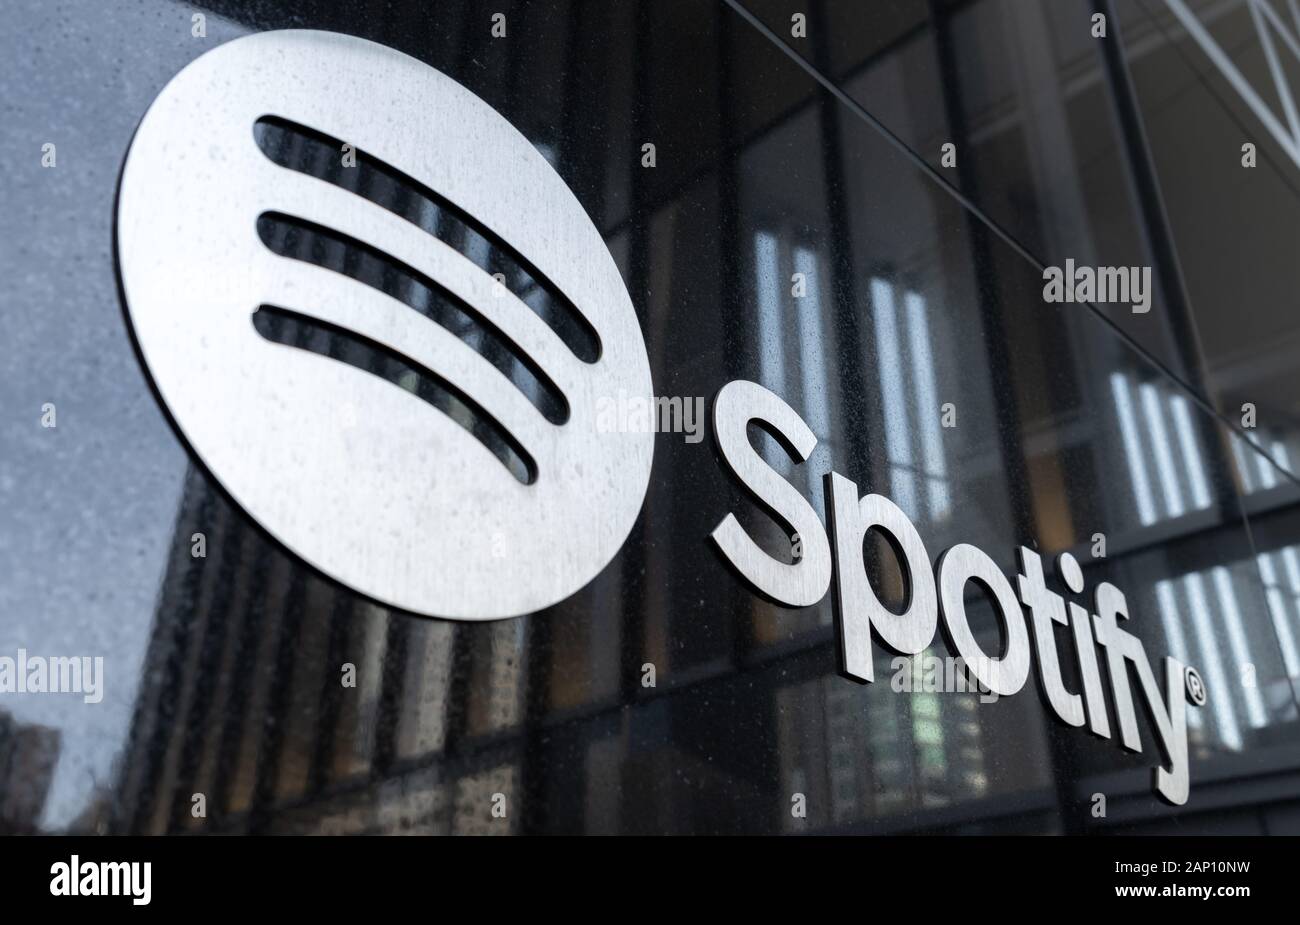 USA: US headquarters of the music streaming service Spotify in